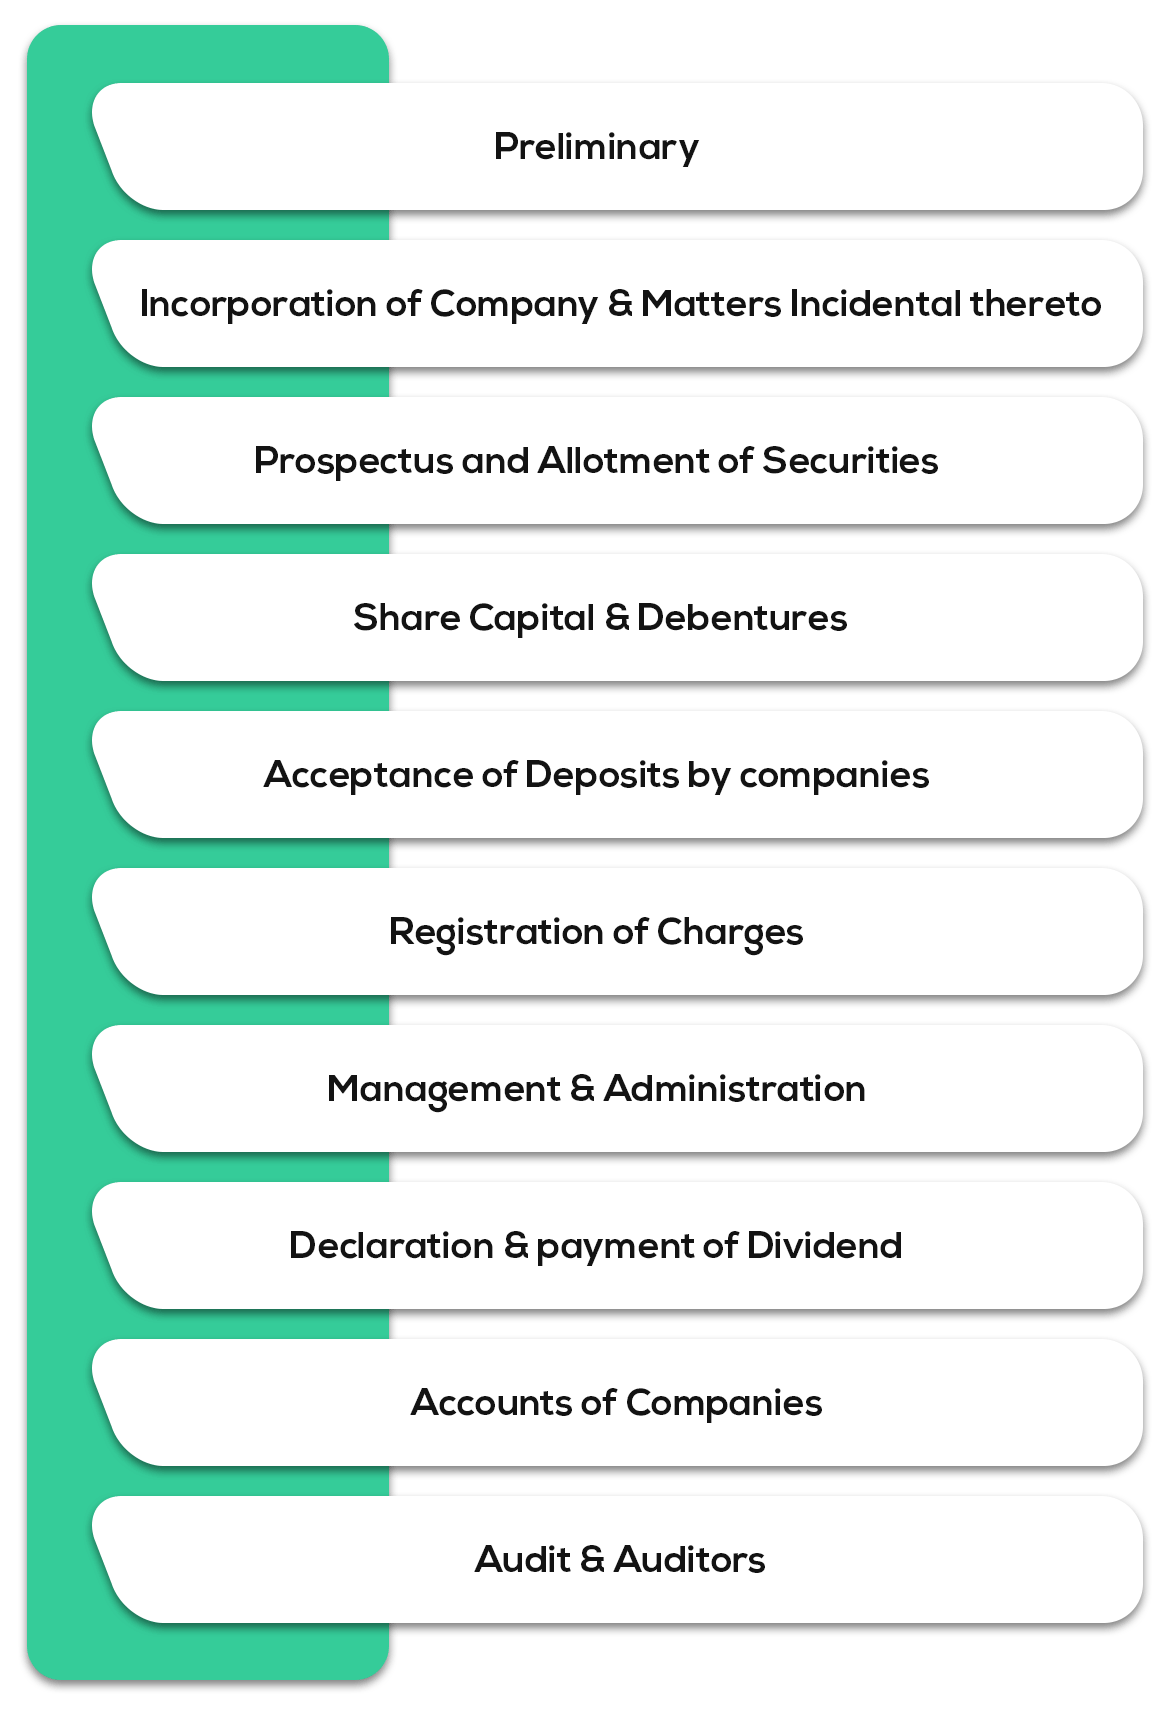 Corporate Laws - Syllabus for CA Intermediate May 2019 Exam Overview